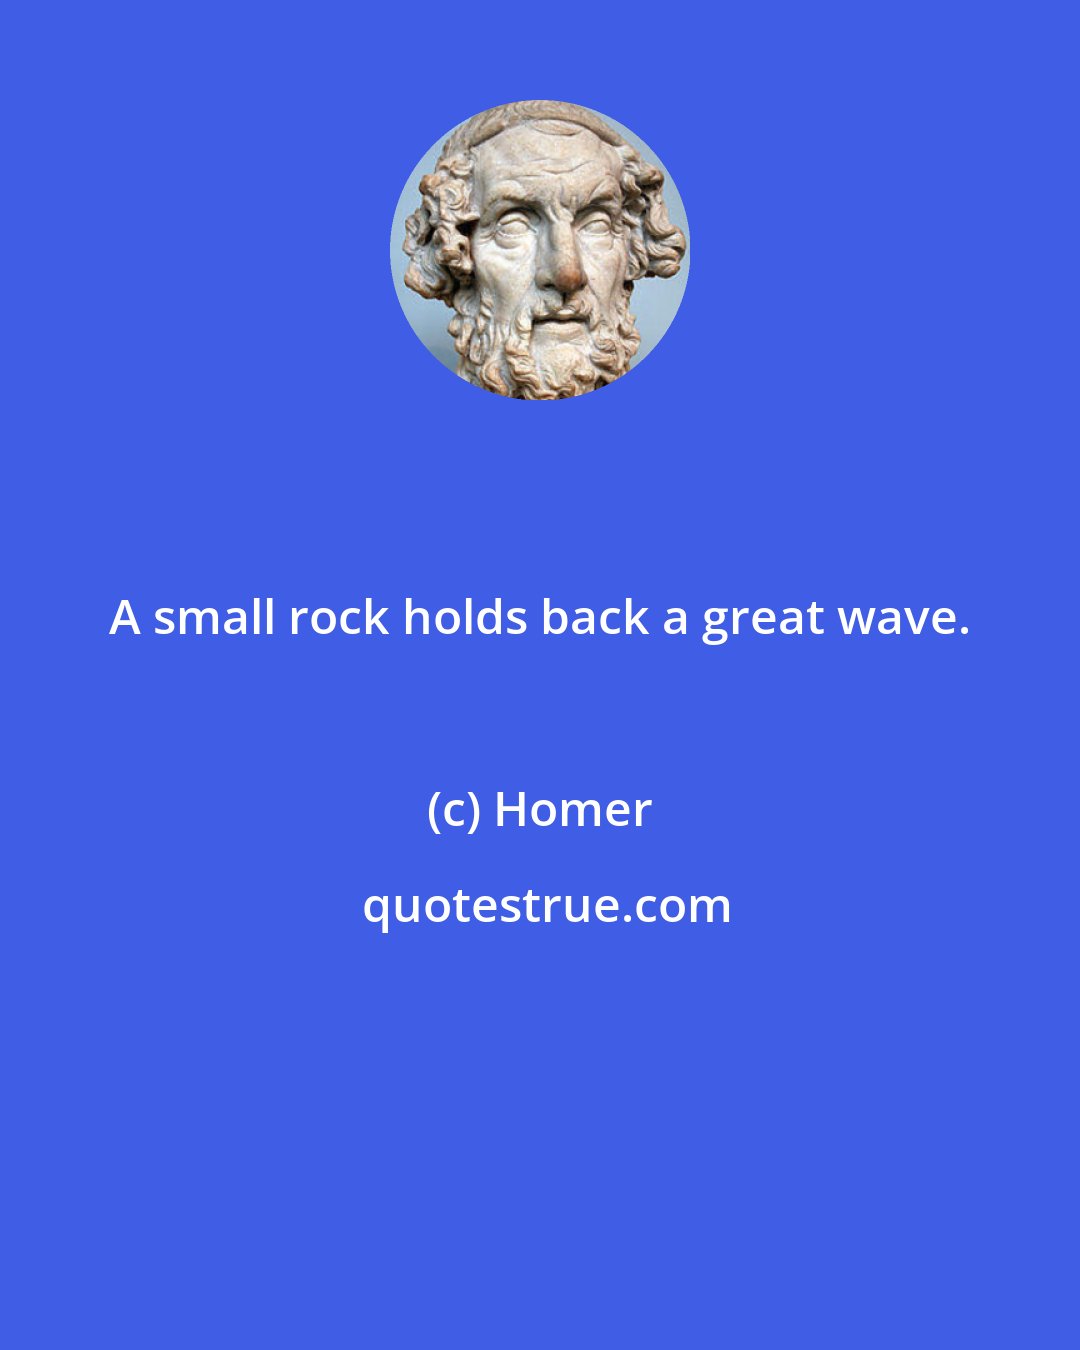 Homer: A small rock holds back a great wave.